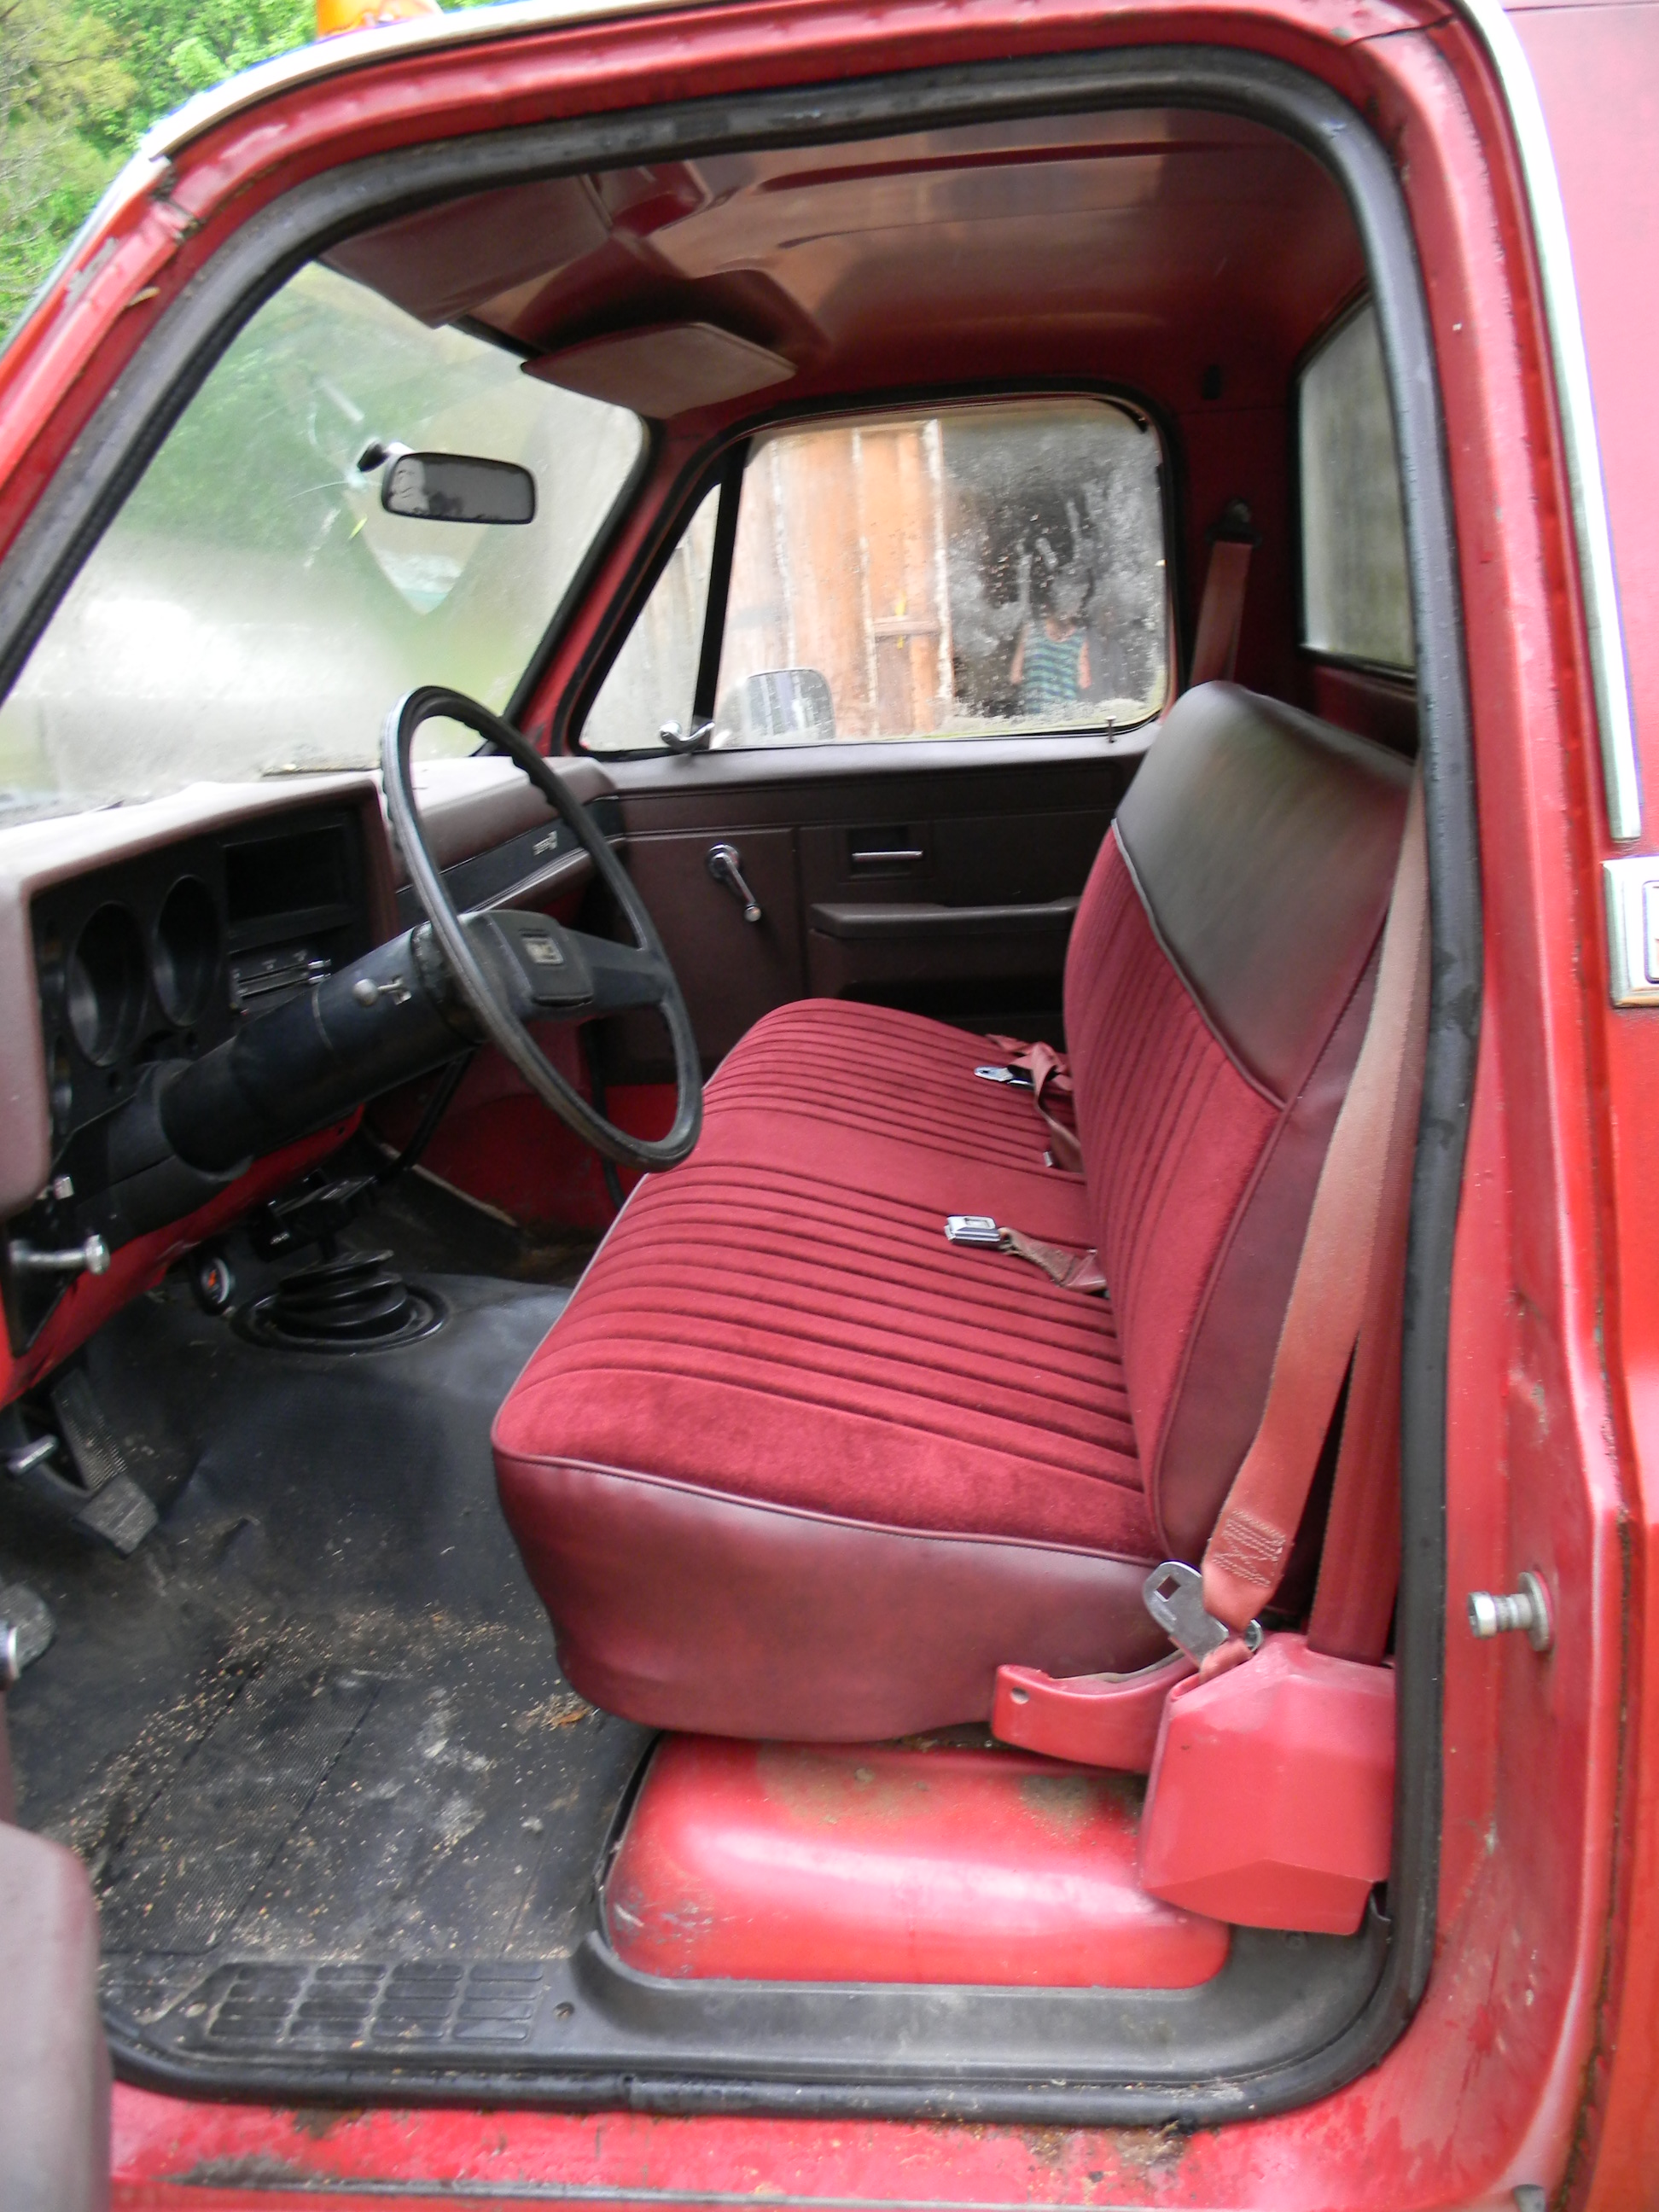 84 Chevy Truck Bench Seat Covers - Bench Seat Covers For 1984 Chevy Truck